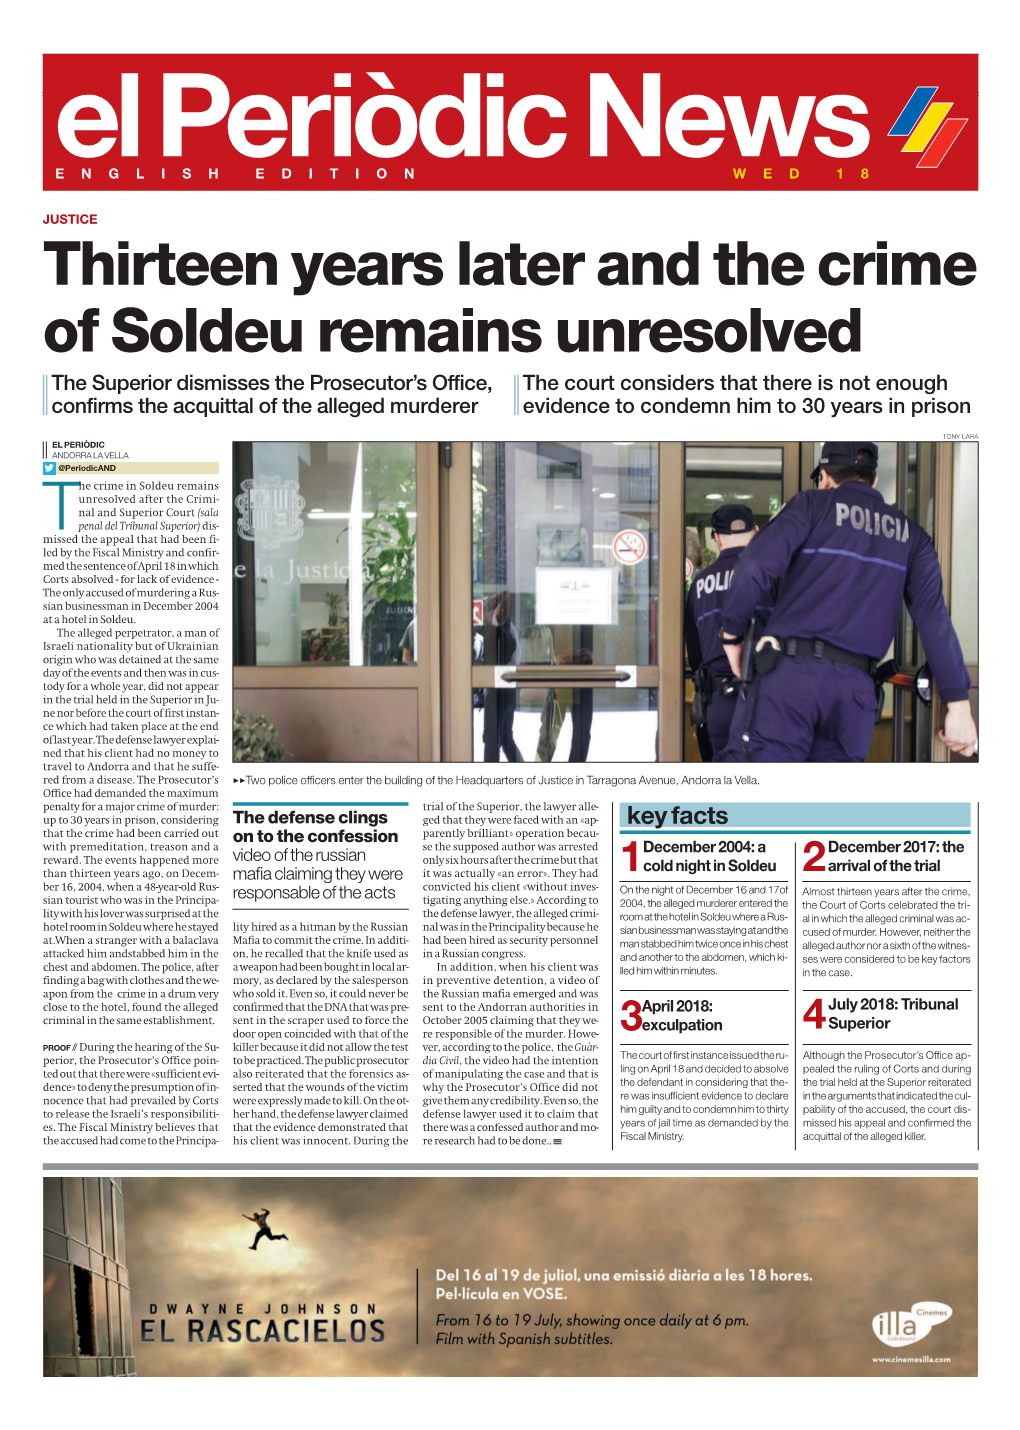 Thirteen Years Later and the Crime of Soldeu Remains Unresolved